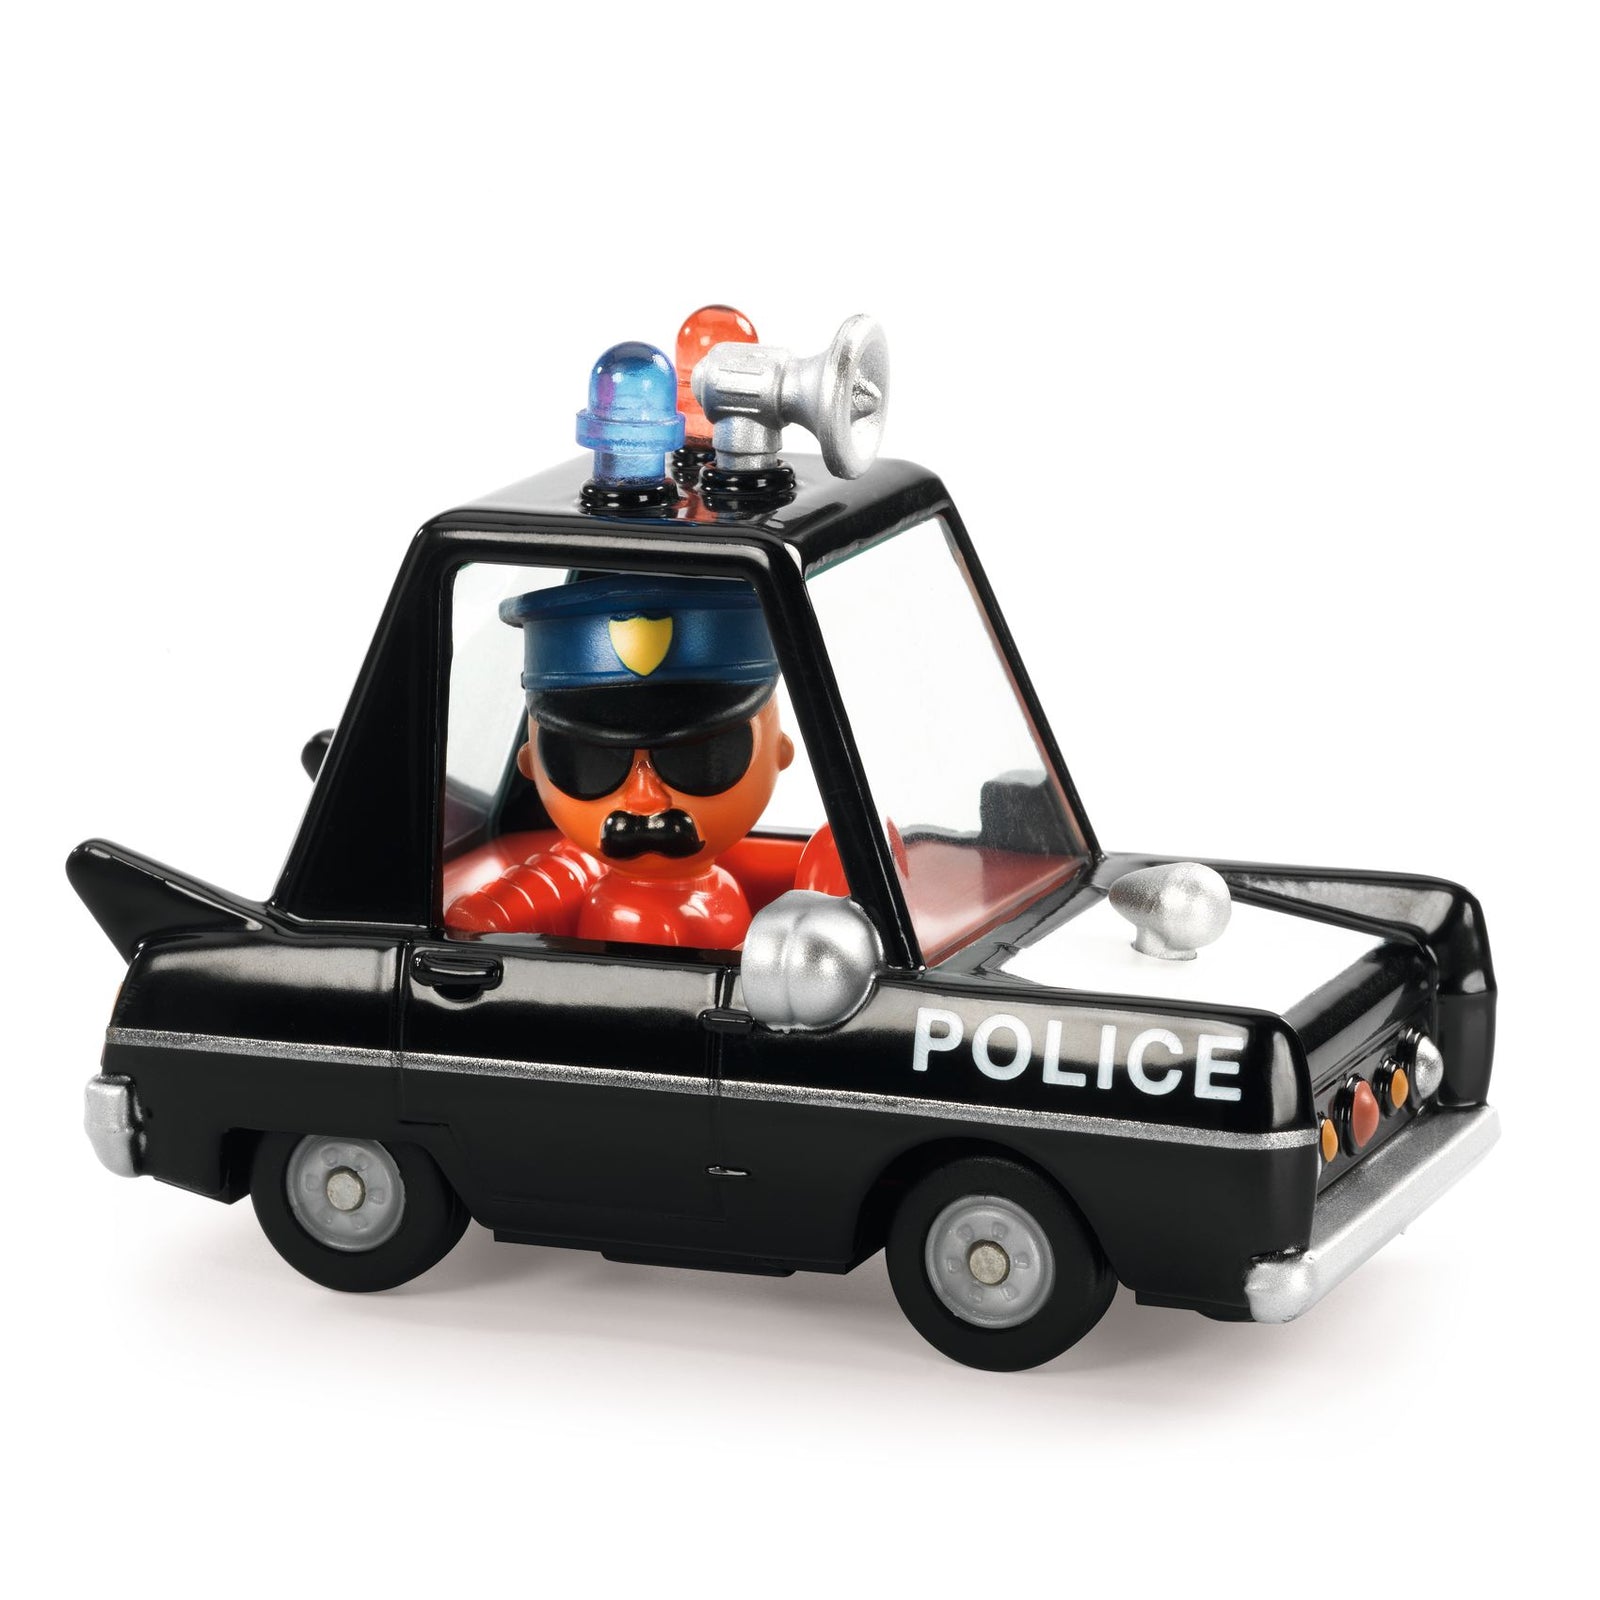 Djeco Crazy Motors Toy Car For Kids – Hurry Police